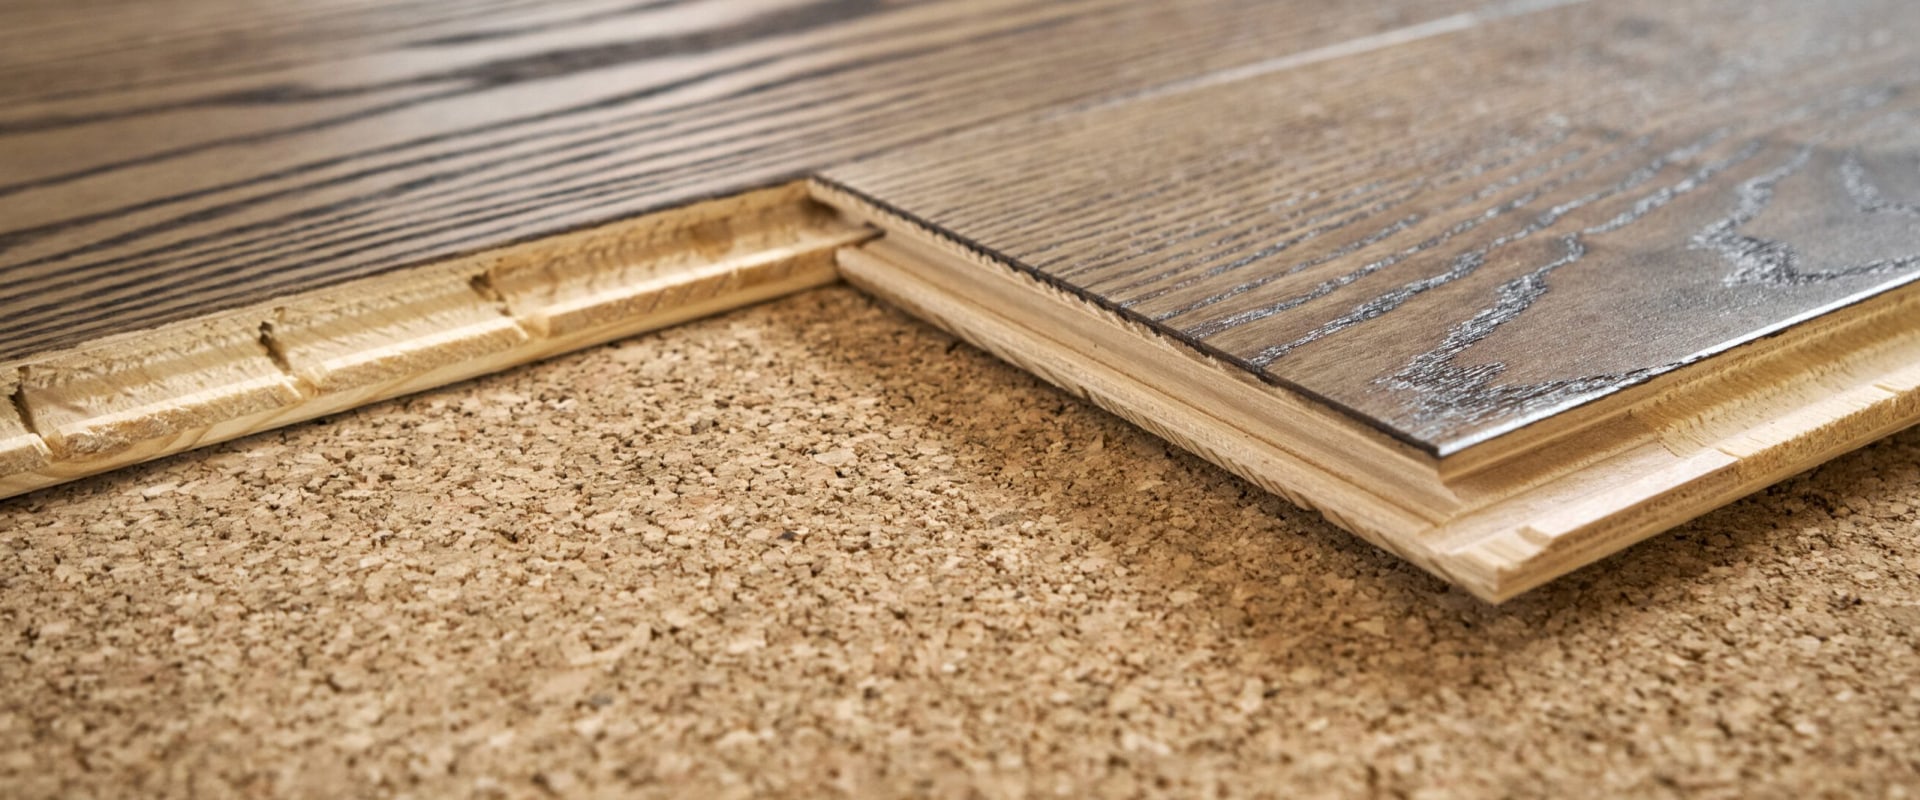 Soundproofing Your Floors: What You Need to Know